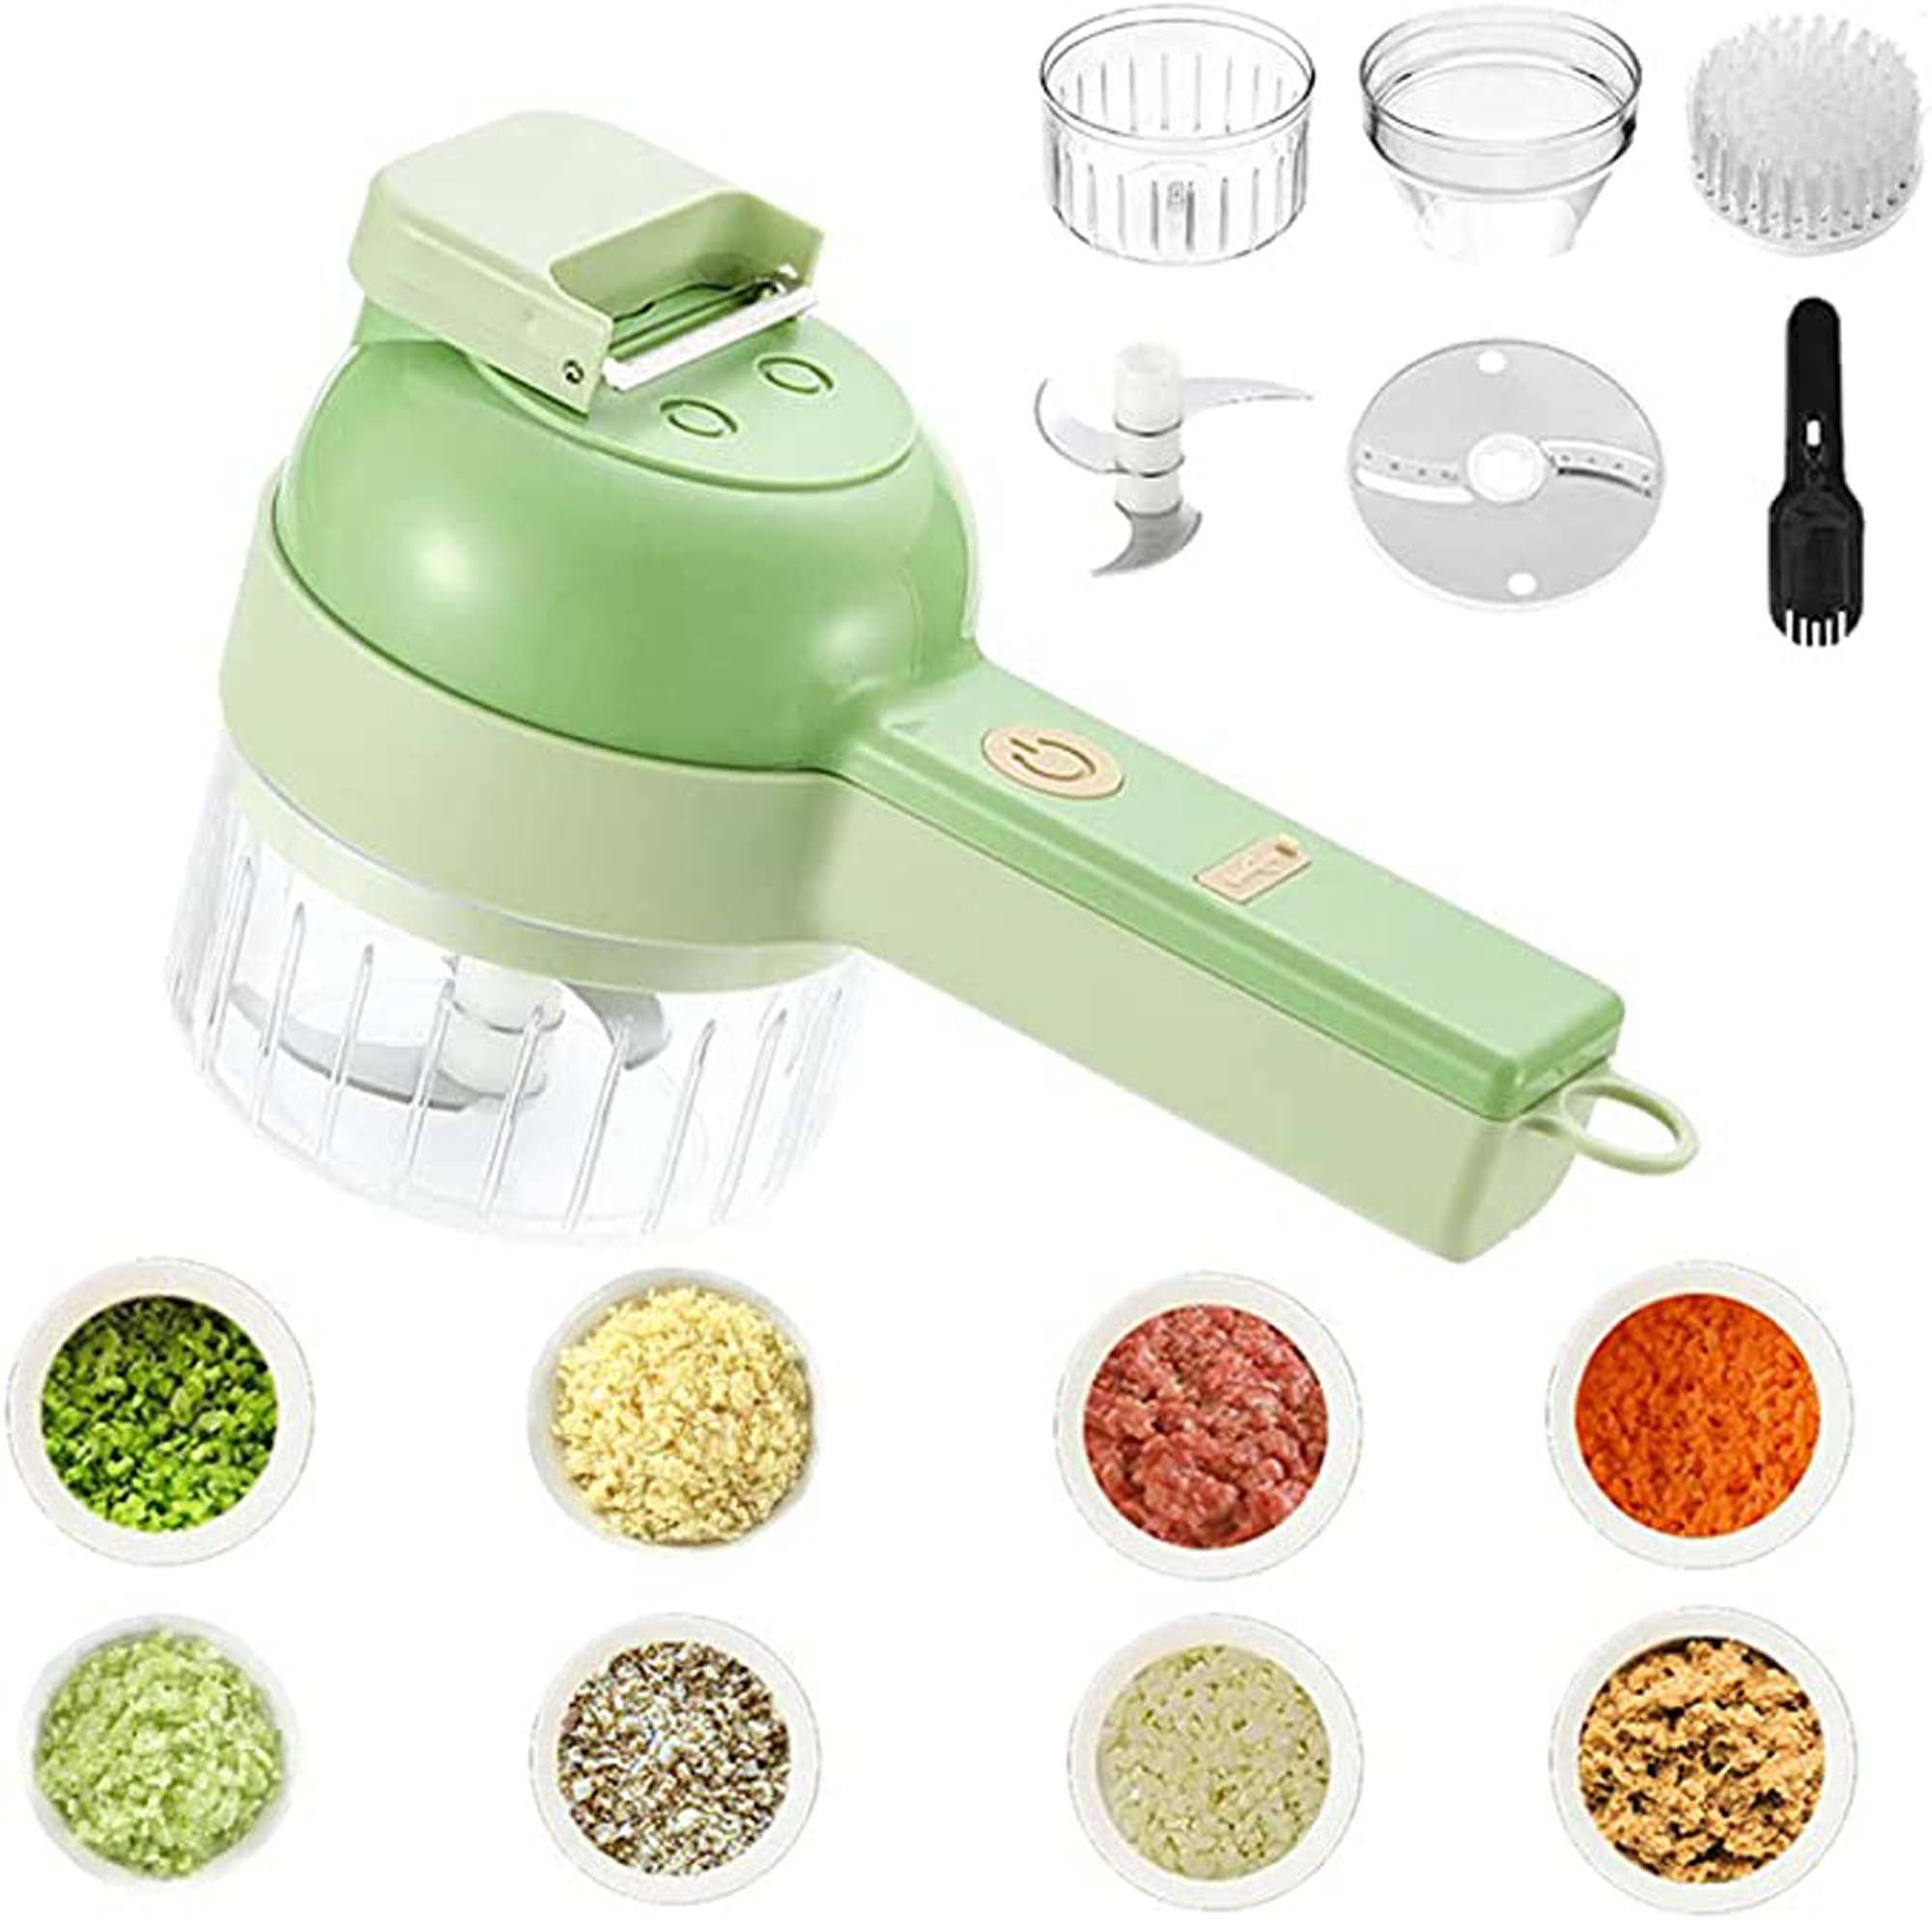 4 in 1 Handheld Electric Vegetable Cutter Set,Wireless Food Processor  Electric Food Chopper for Garlic Chili Pepper Onion Ginger Celery Meat with  Brush - Price History